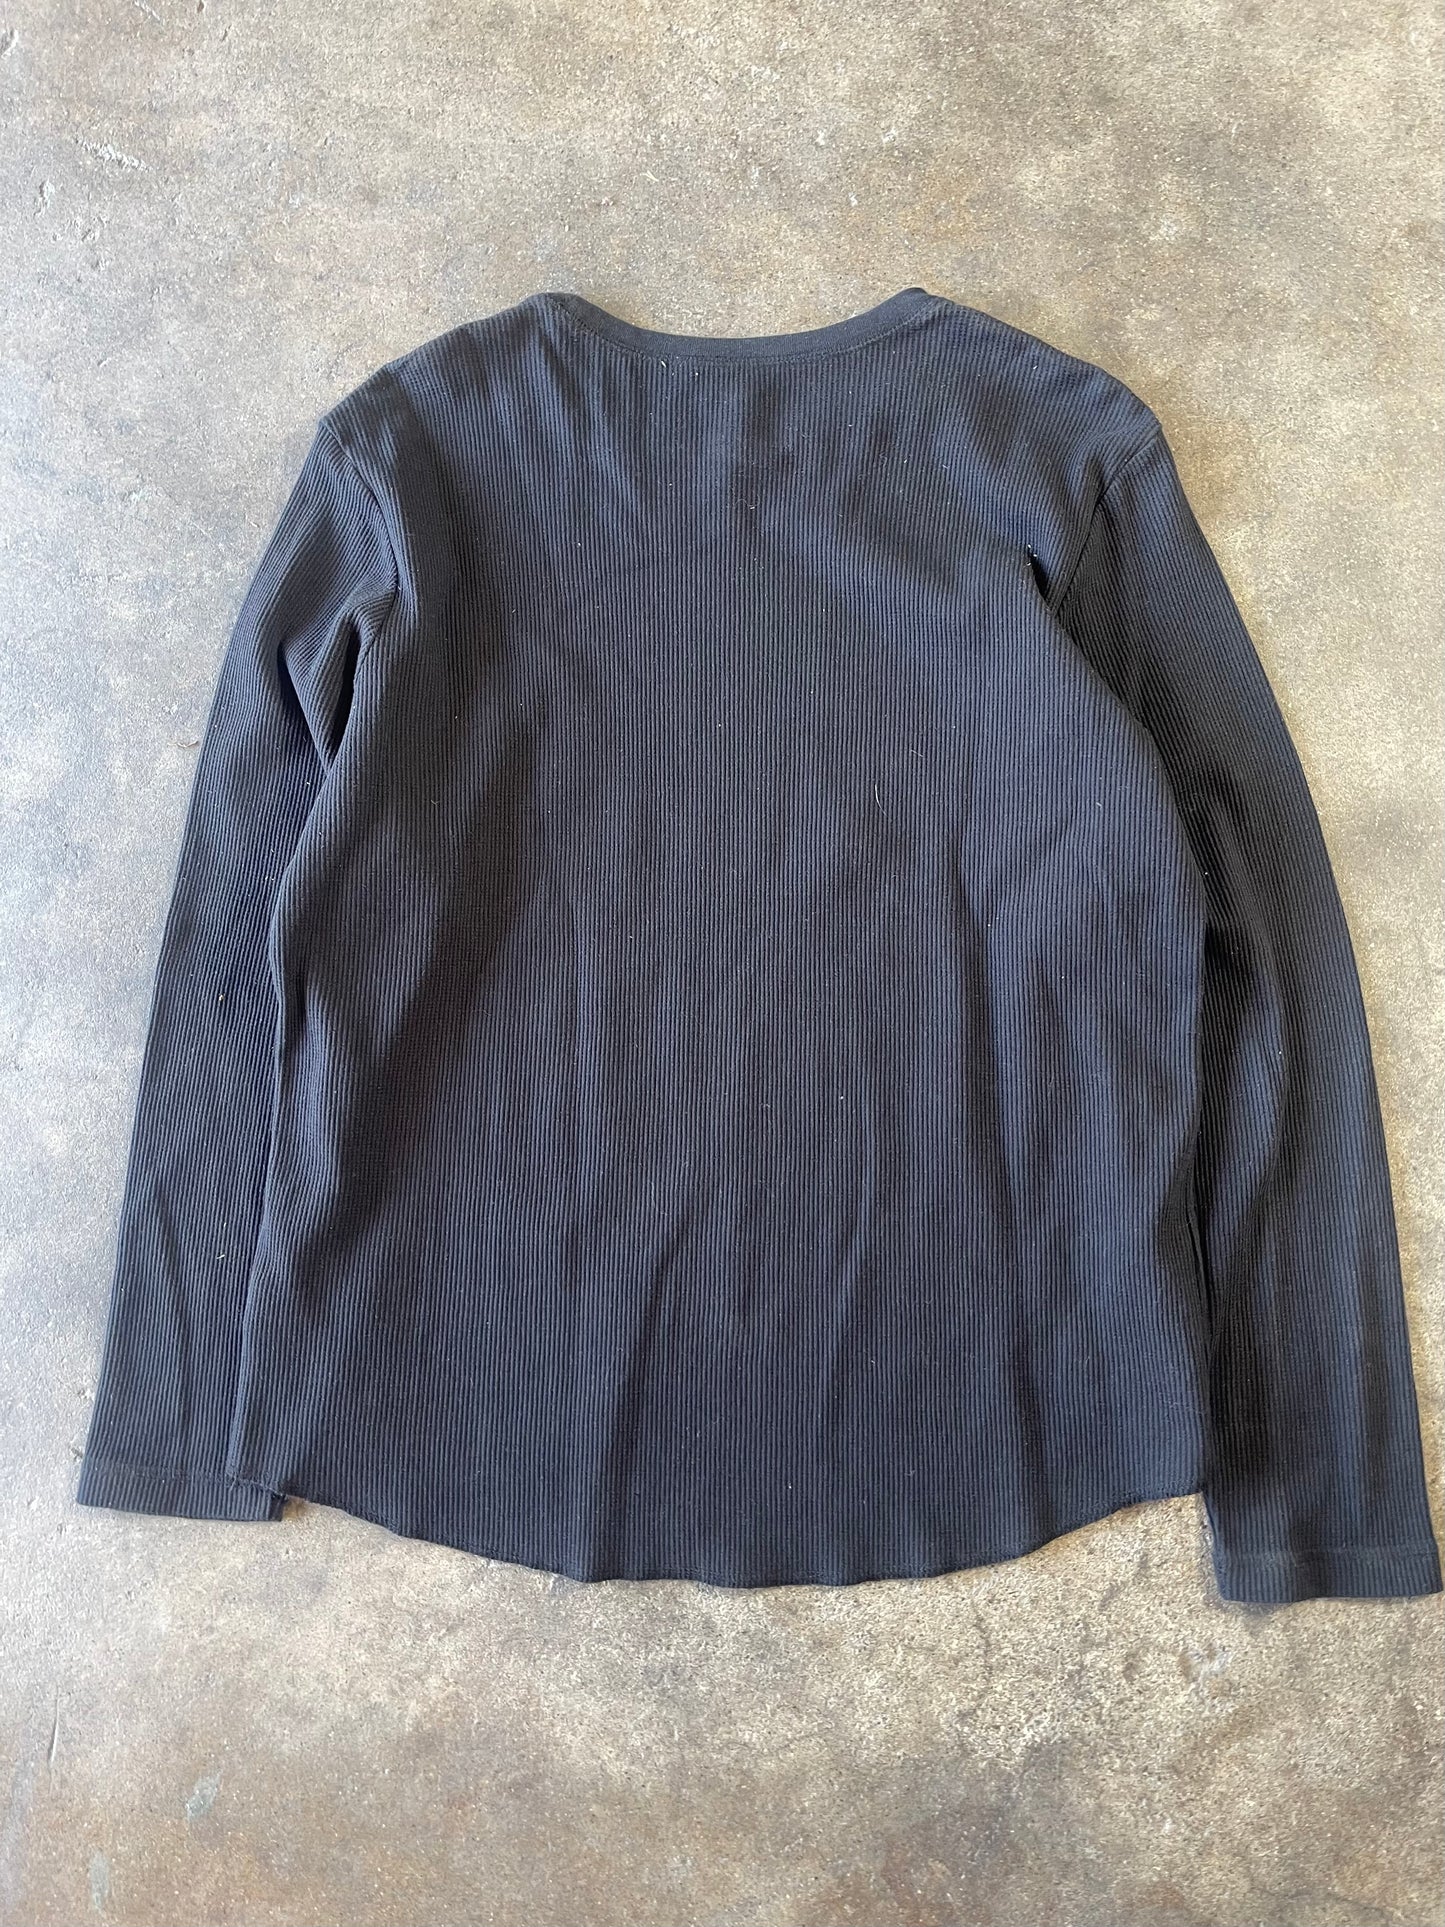 00’s Black Faded Glory Thermal XL